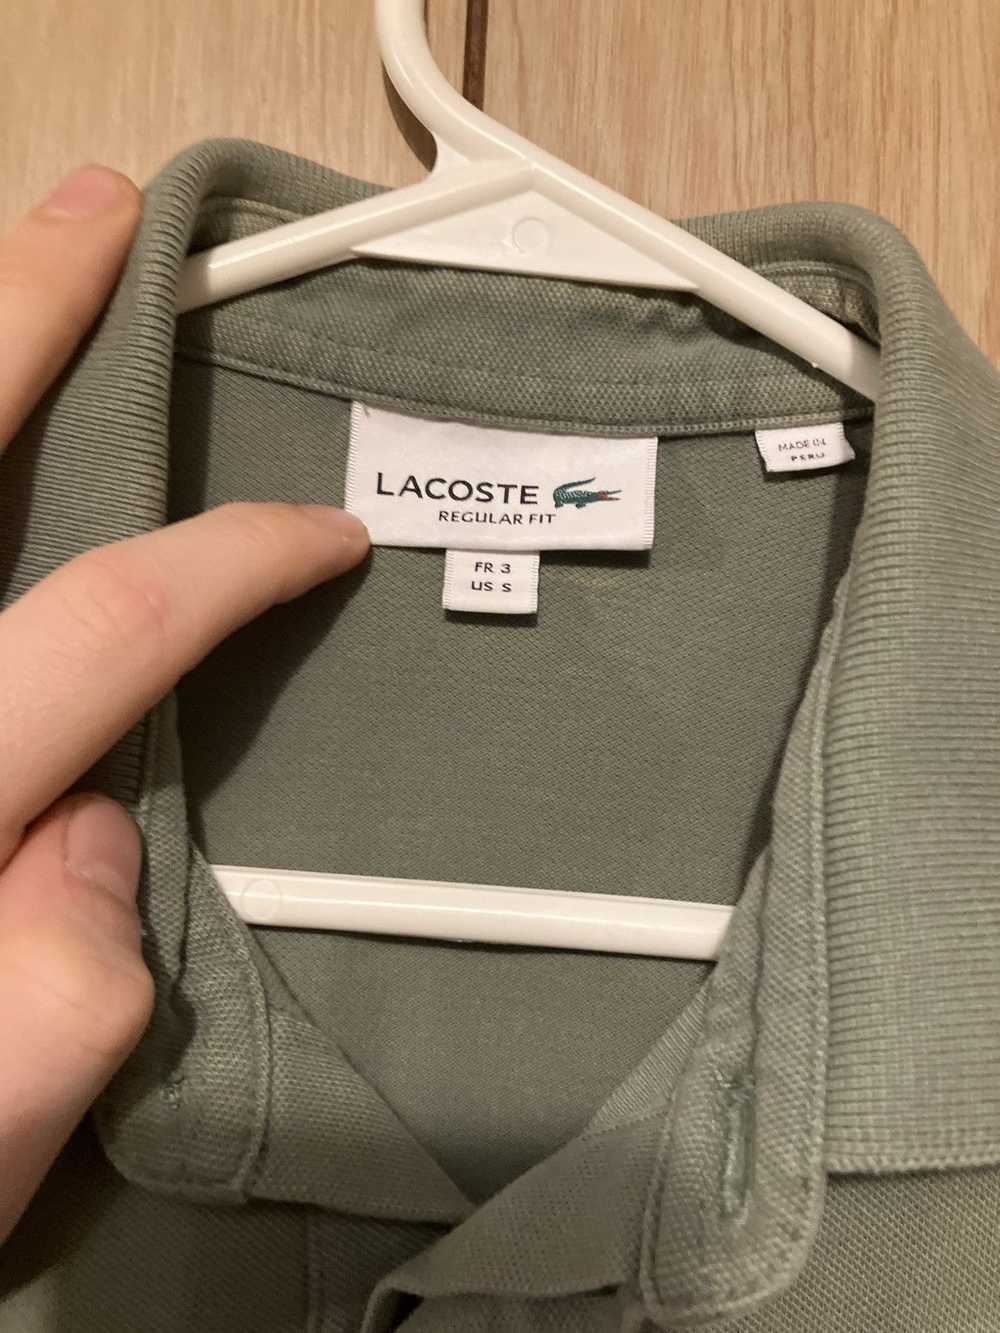 Lacoste Lacoste Polo Shirt. Small - image 9